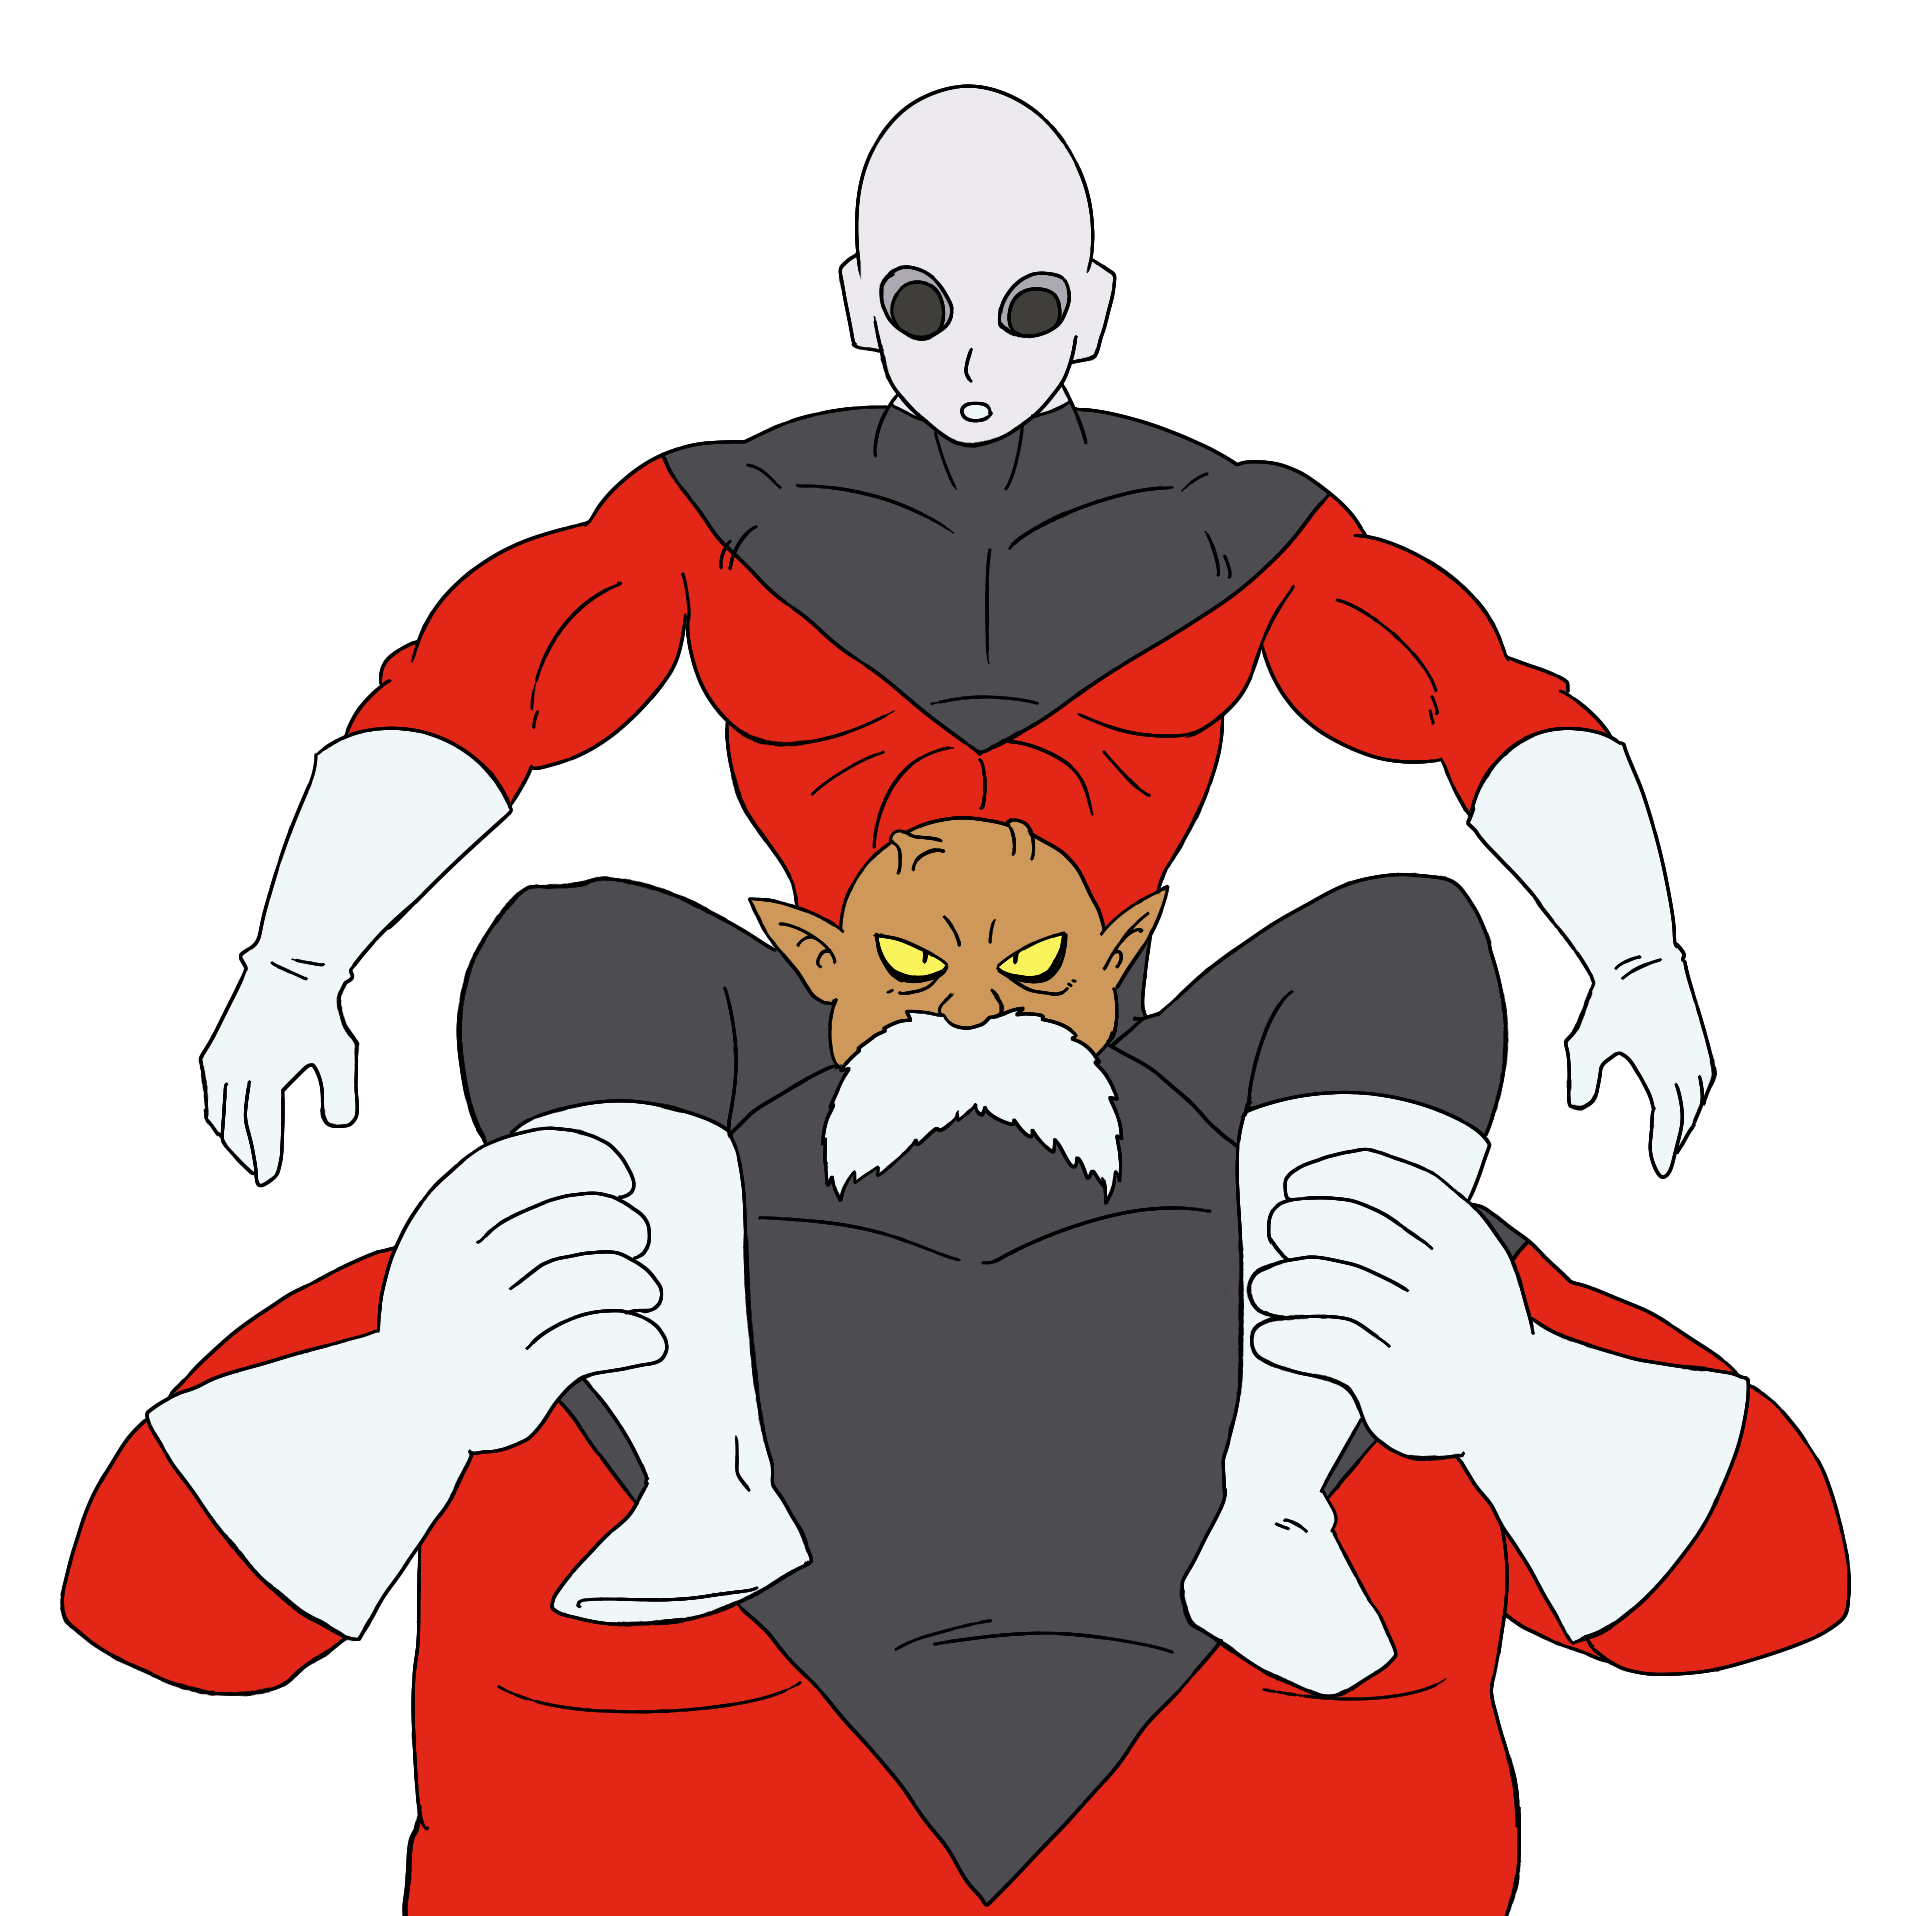 Toppo and Jiren celebration (shirtless version included)